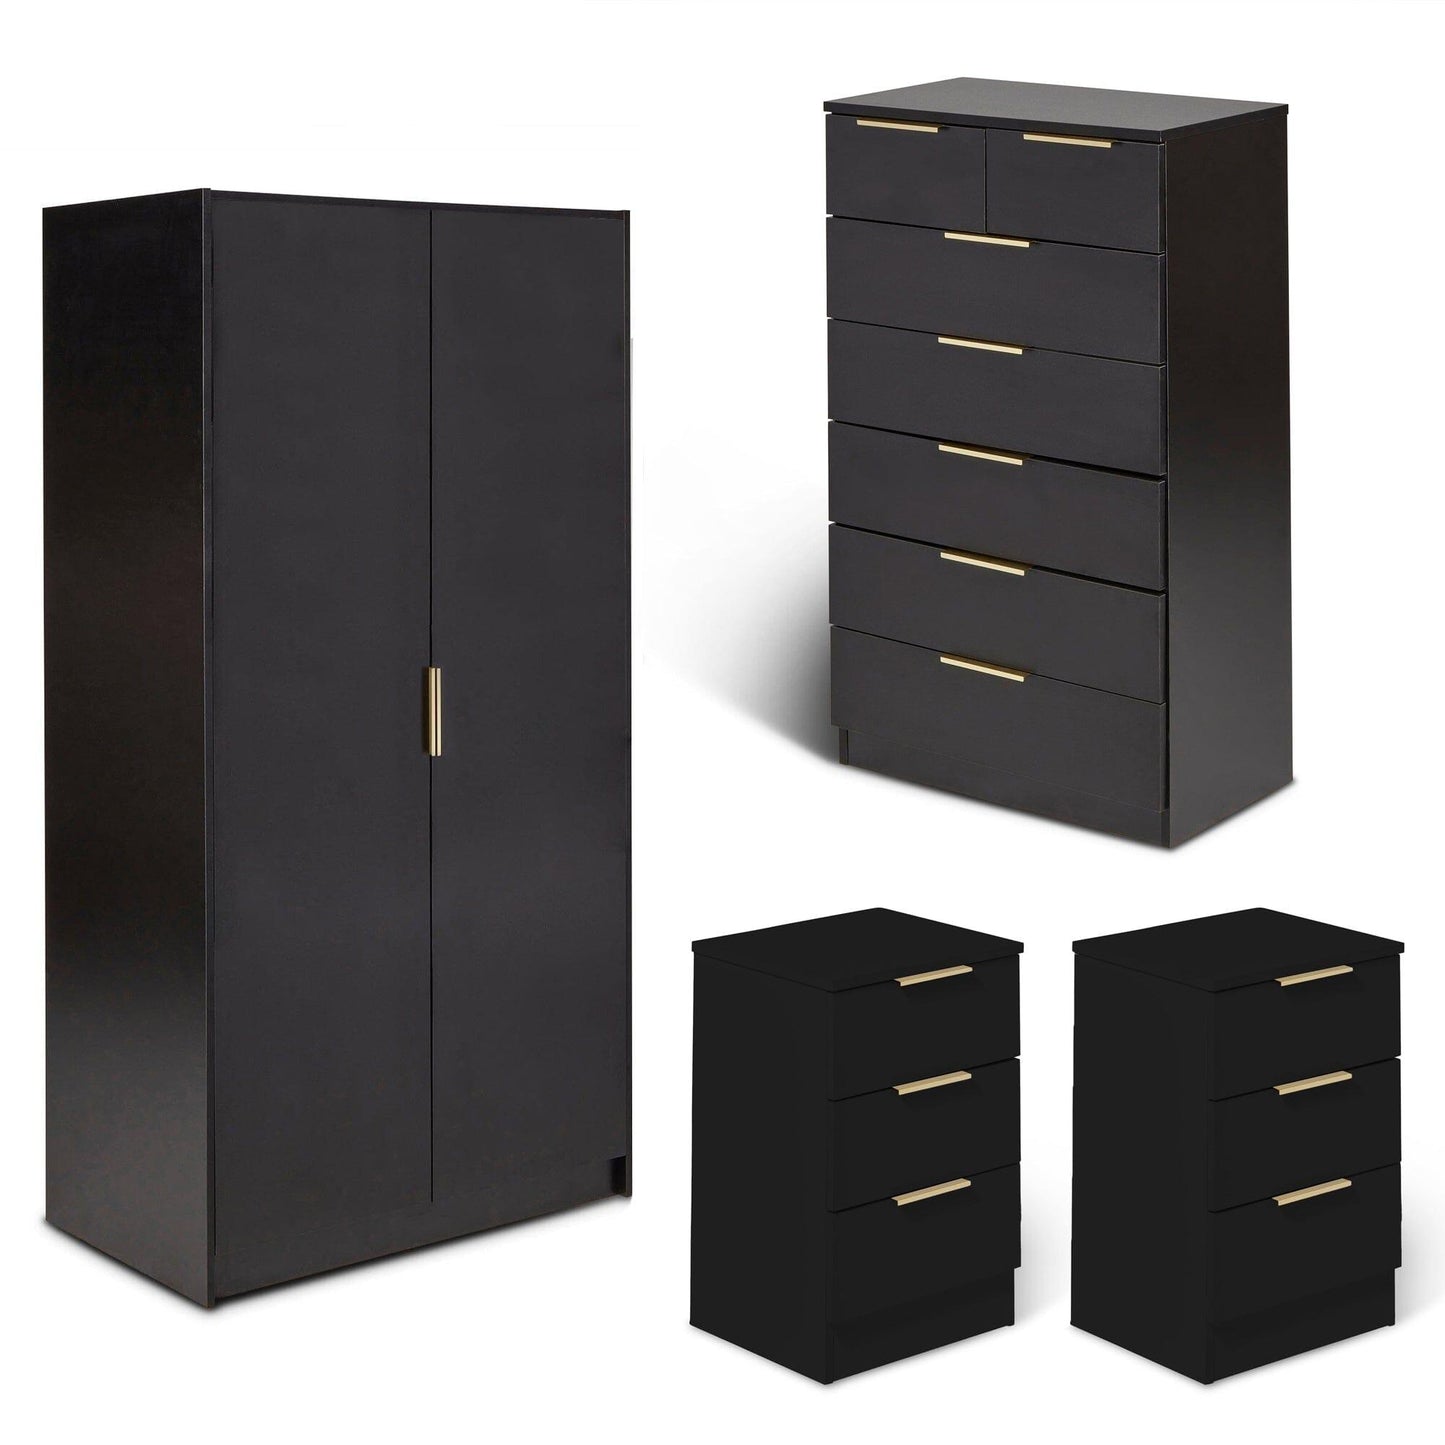 Essie 4 Piece Bedroom Set - 2 over 5 Chest of Drawers - Pitch Black